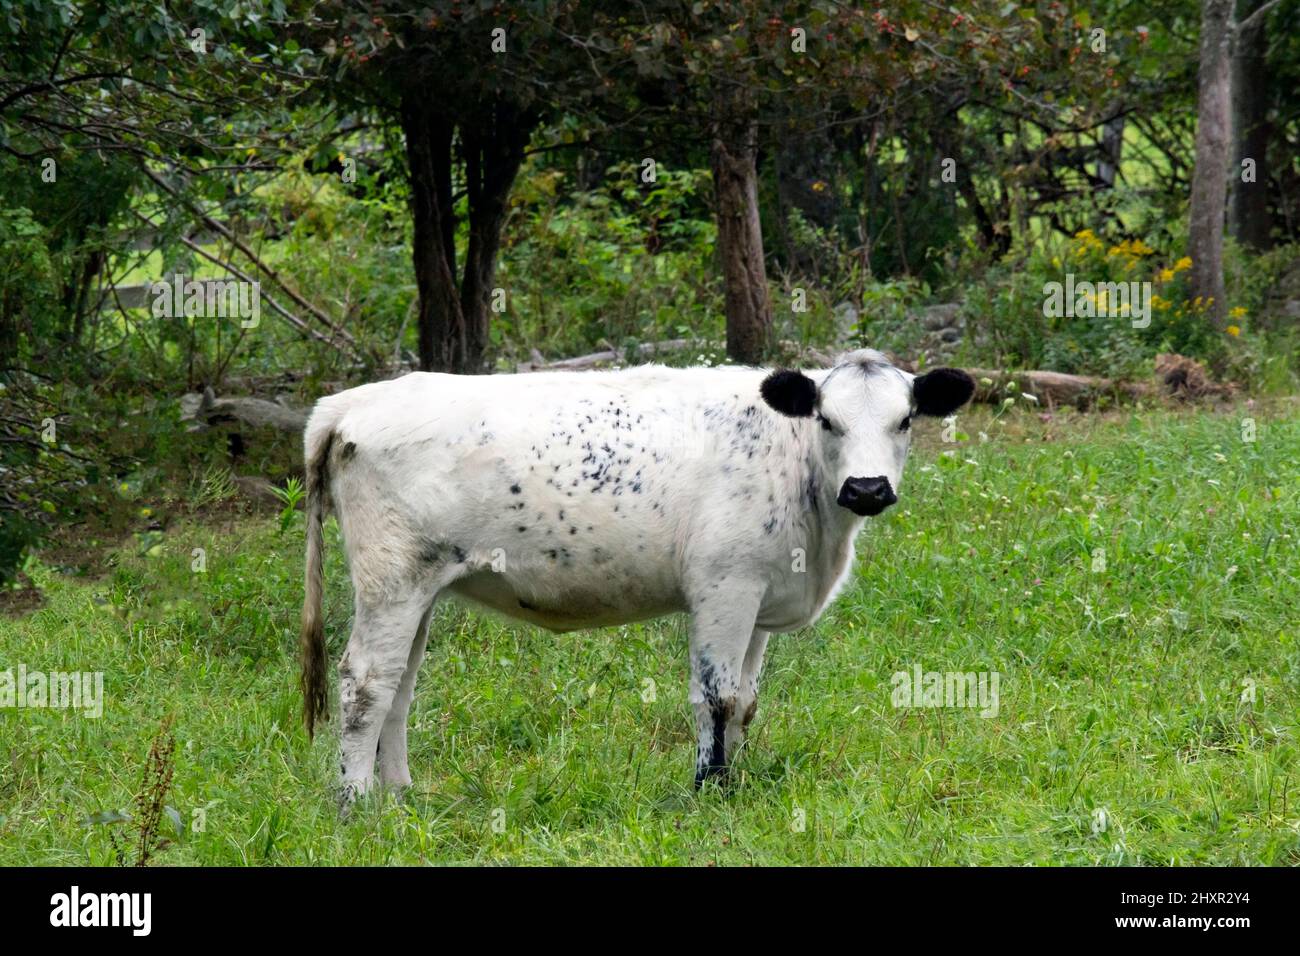 A  British White Cattle grazing in a feild in Pennsylvania's Pocono Mountains.  This is a rare brred raised for both beef and dairy. Stock Photo